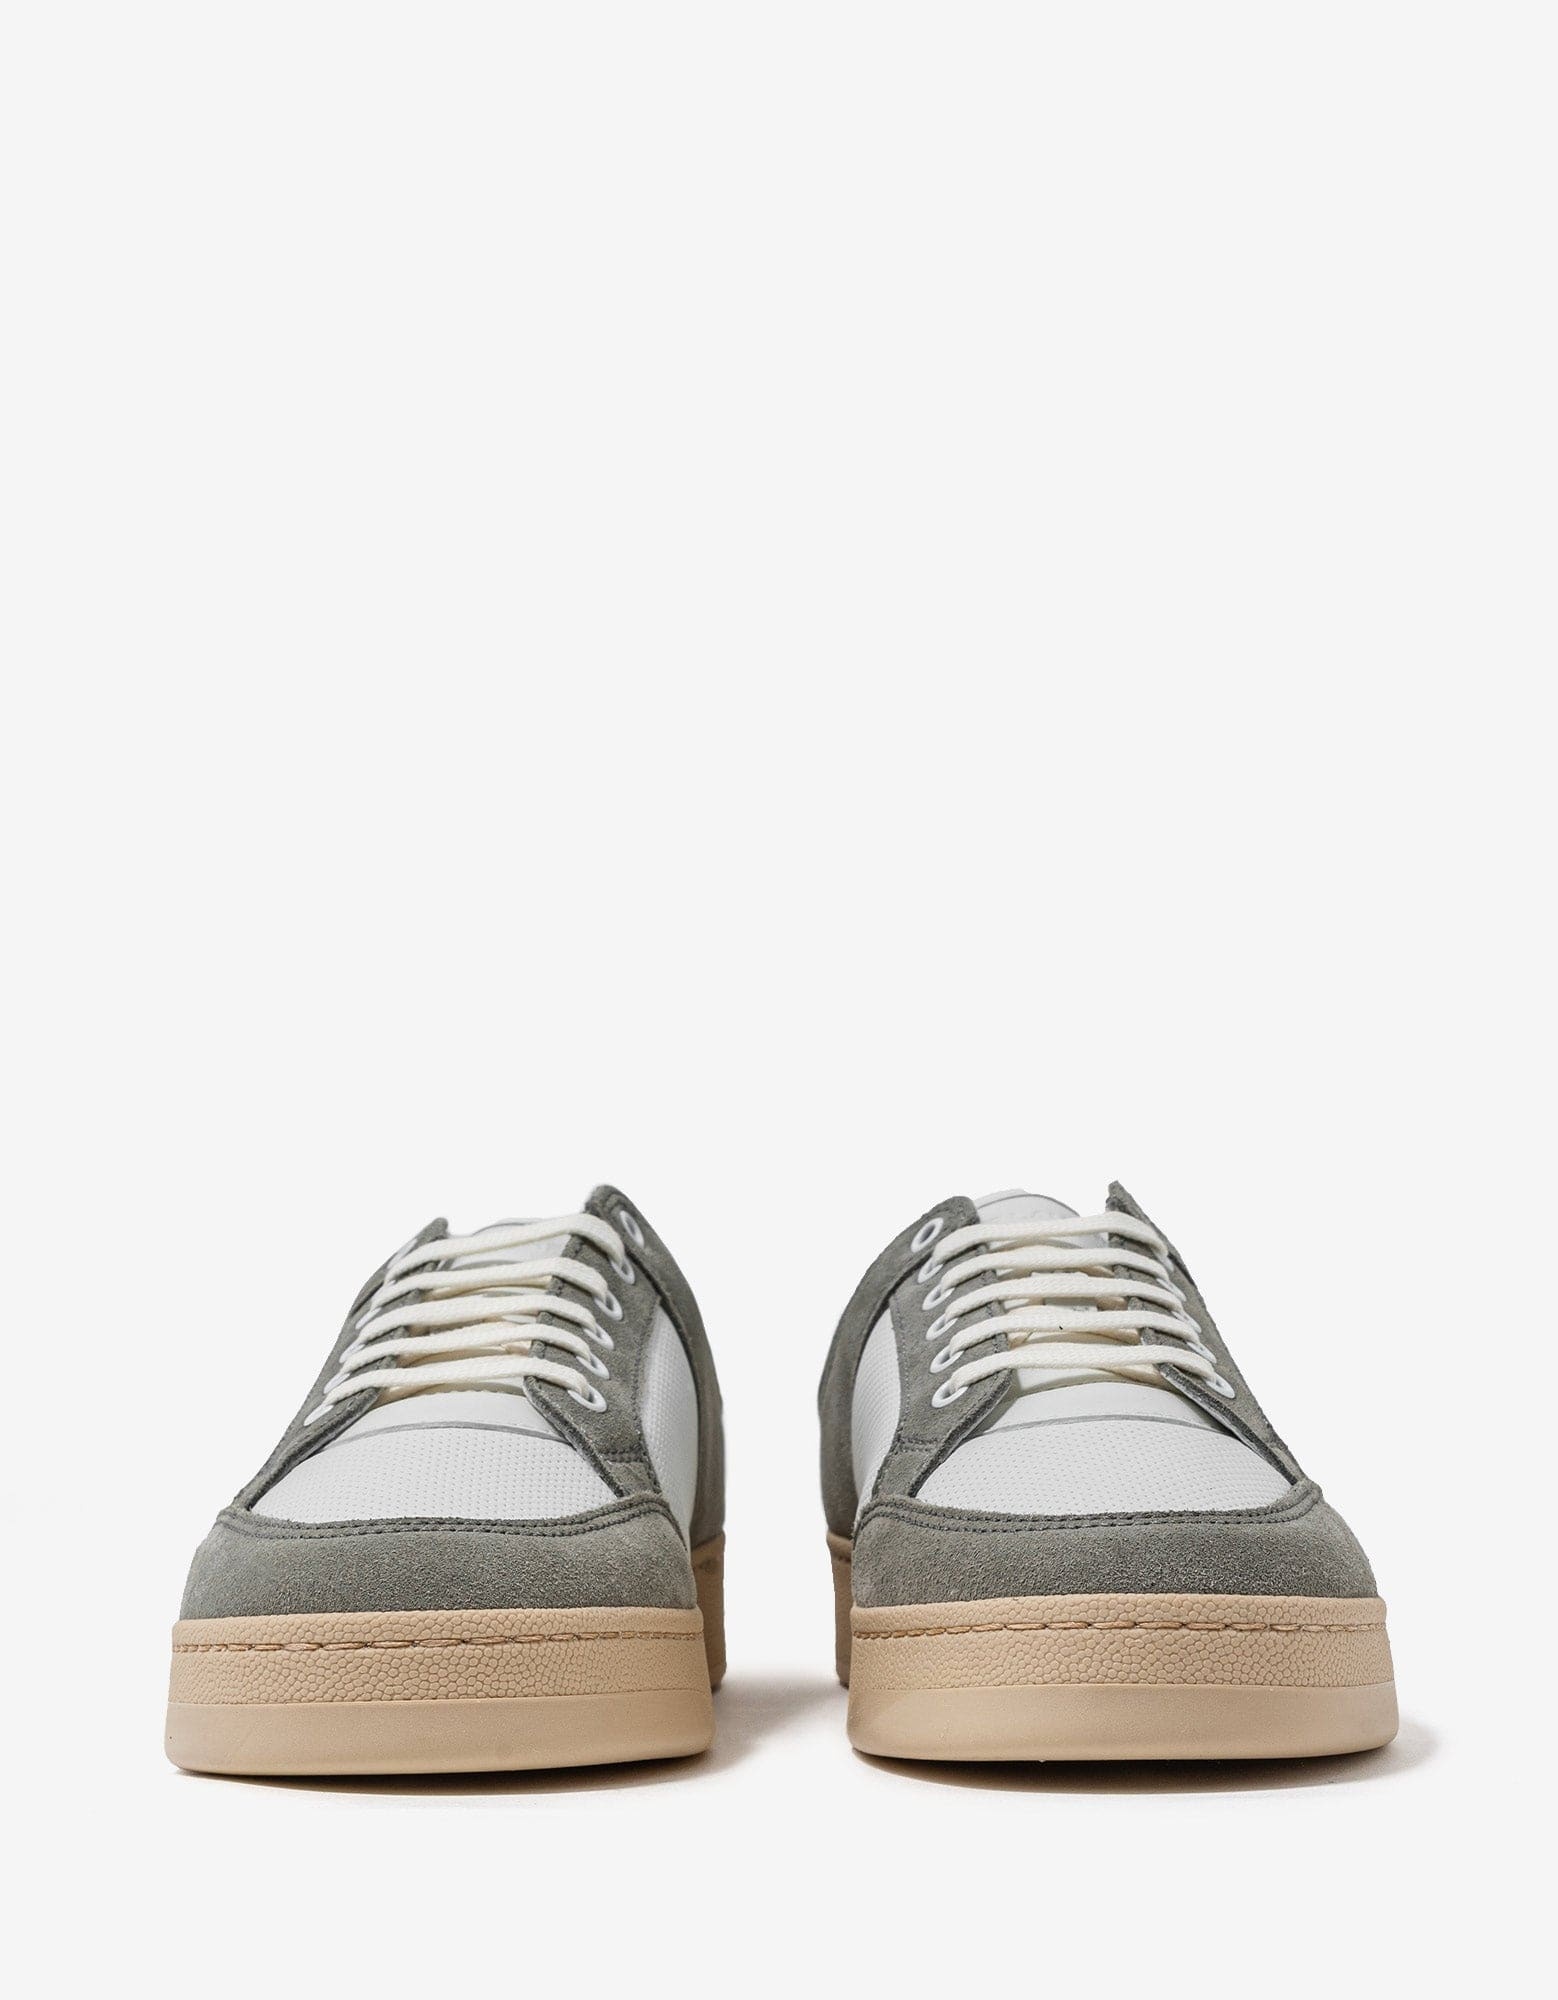 White & Grey SL/61 Leather Trainers - 4